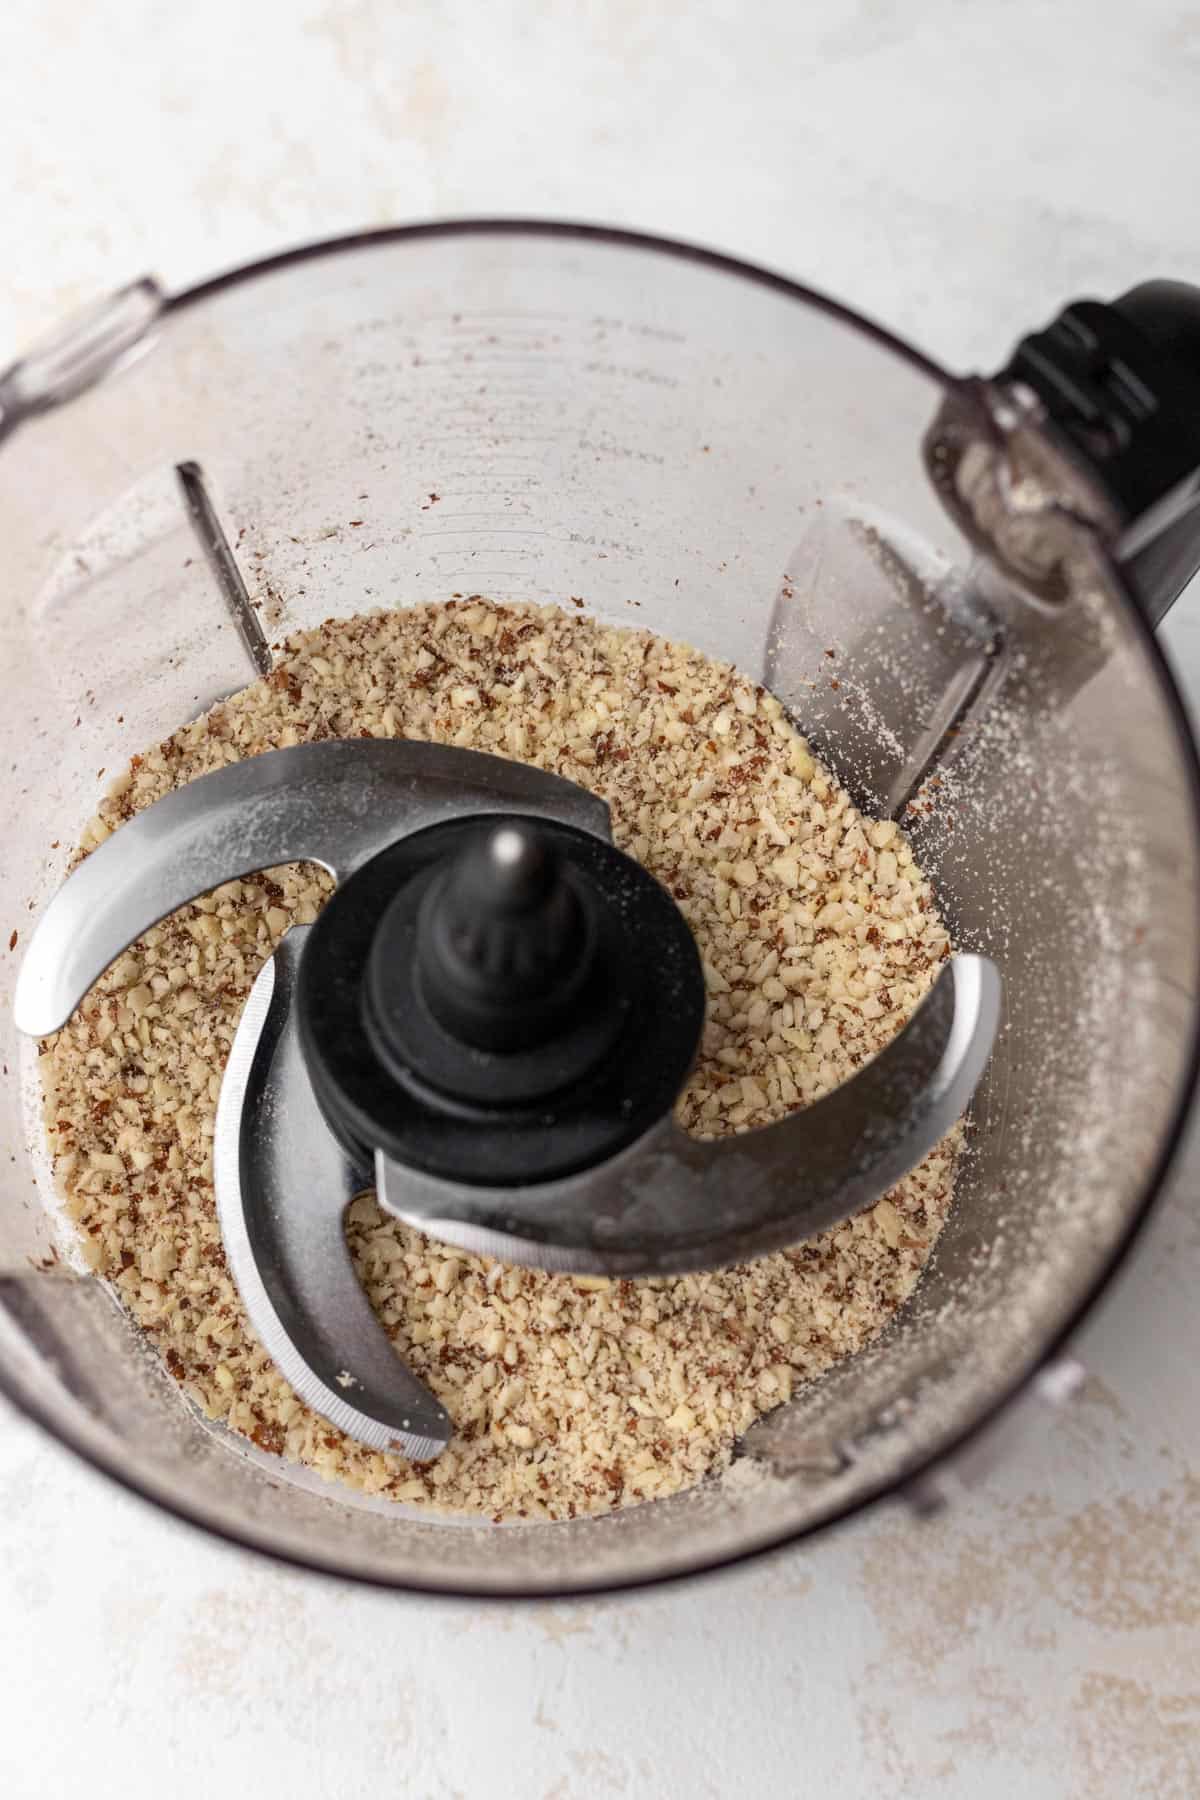 Pulverized almonds in the base of a food processor.